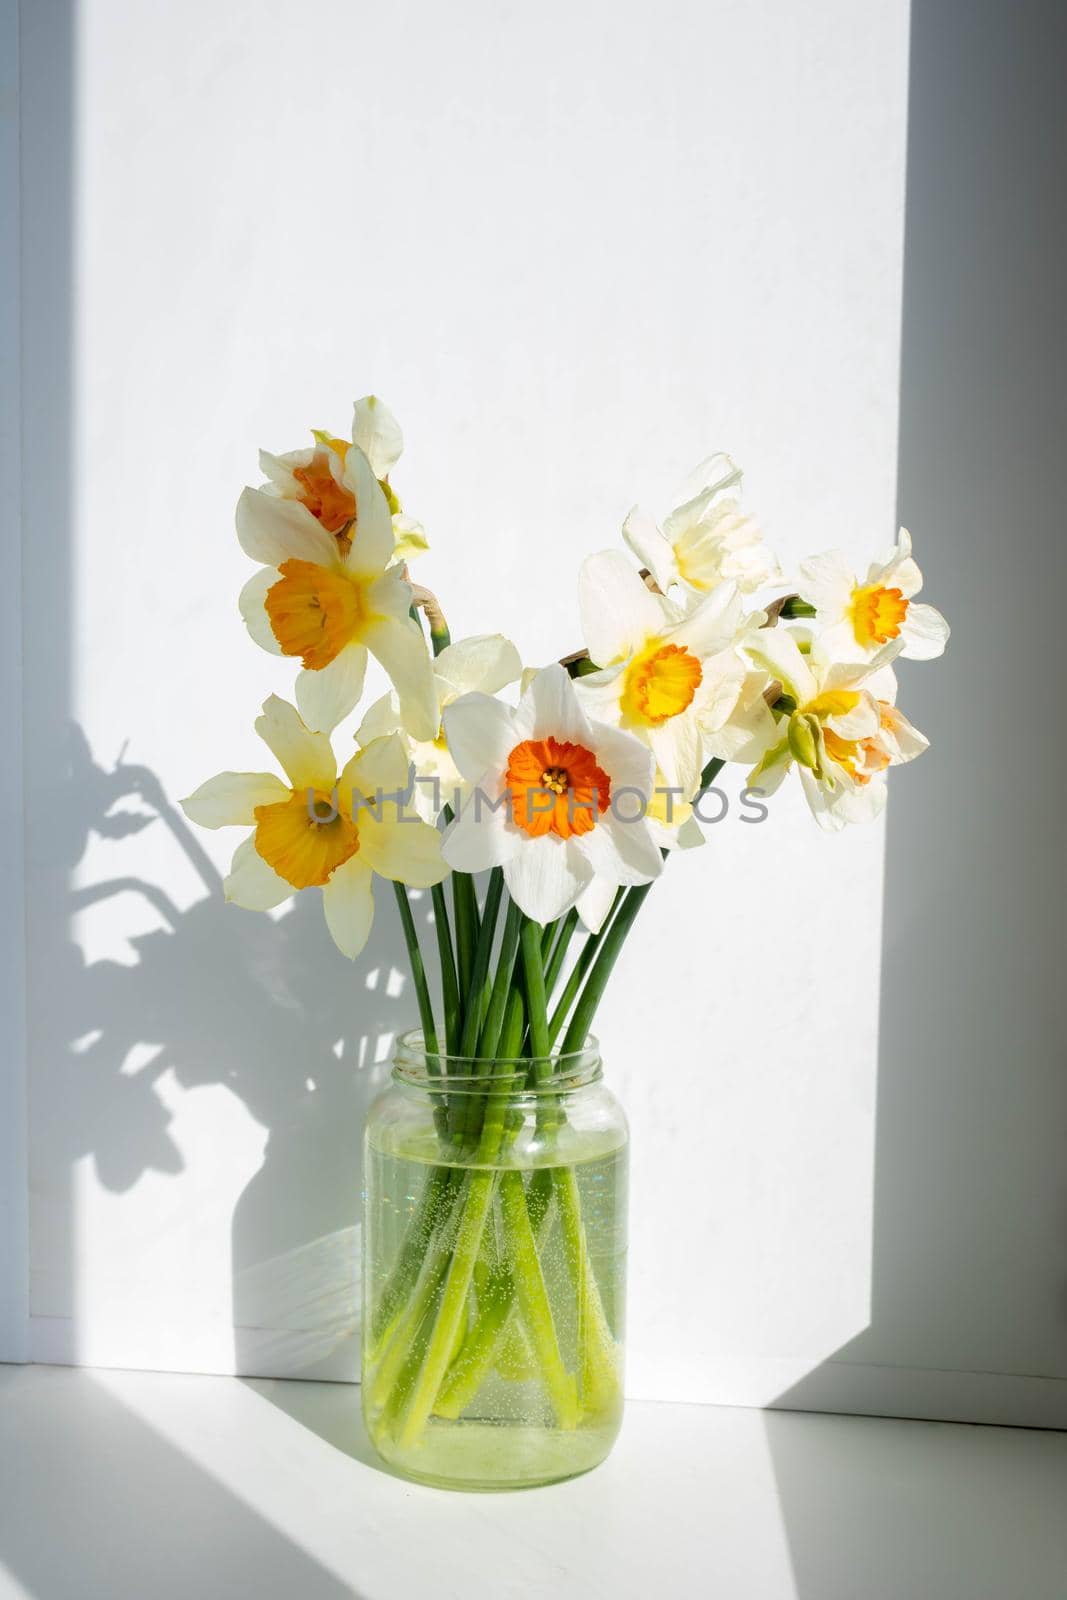 A bouquet of daffodils in a jar, on a white background on a window on a sunny day by lapushka62